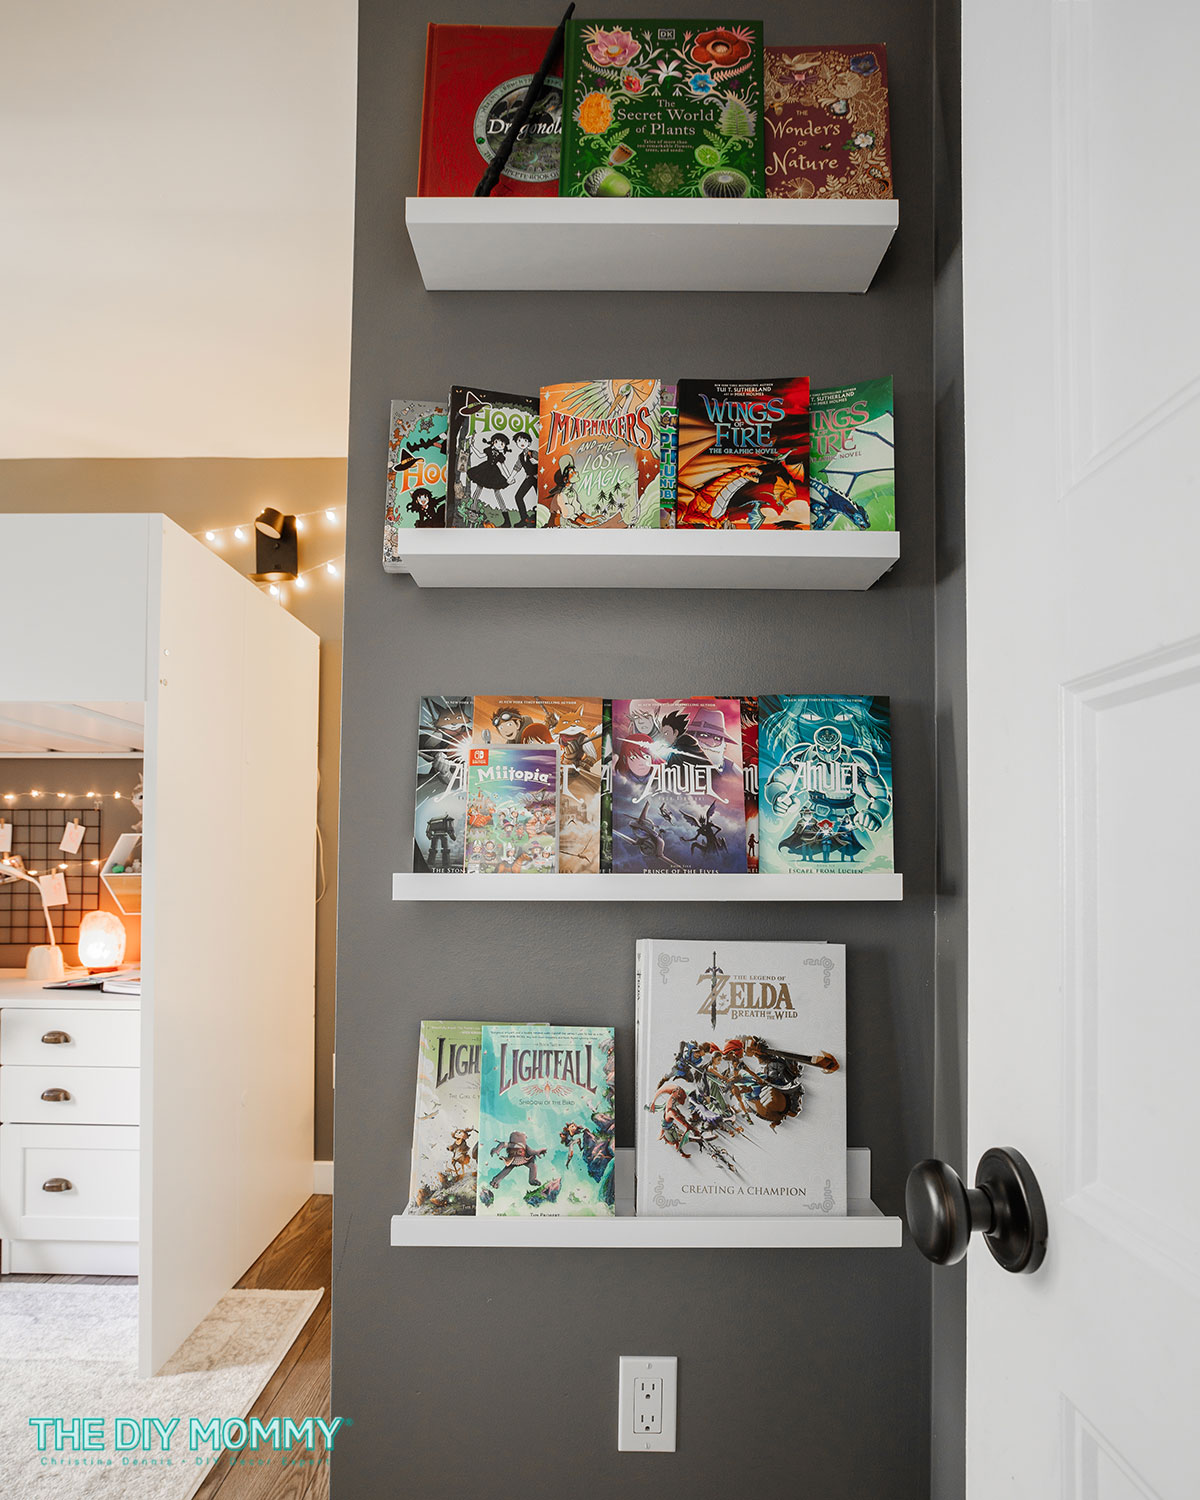 A small bedroom wall painted grey with white floating shelves for books.